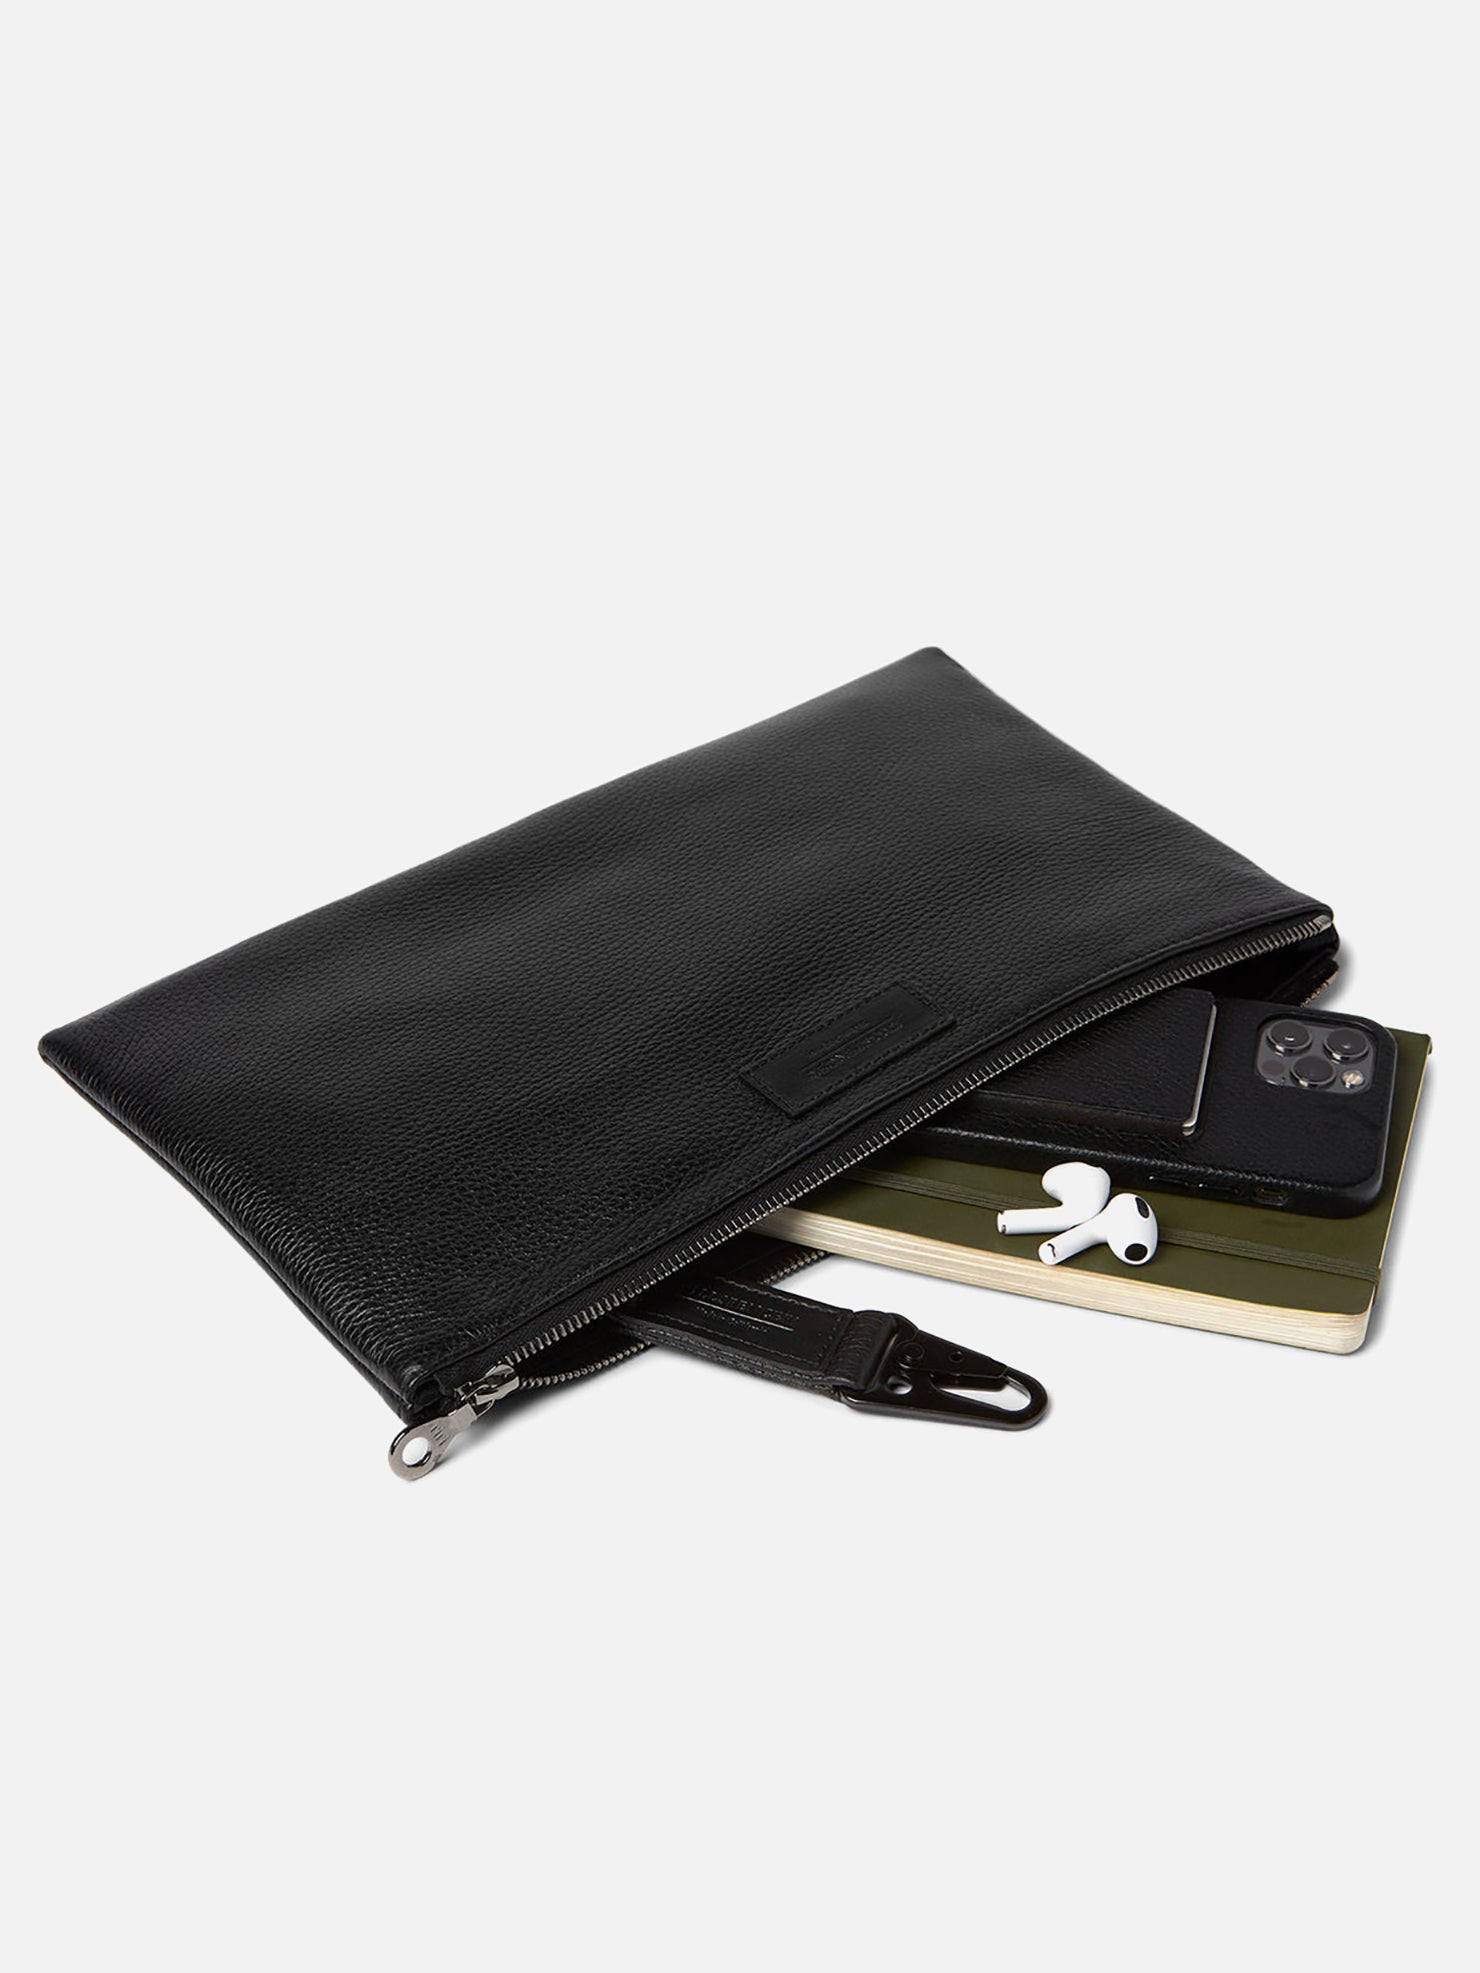 pouch black leather